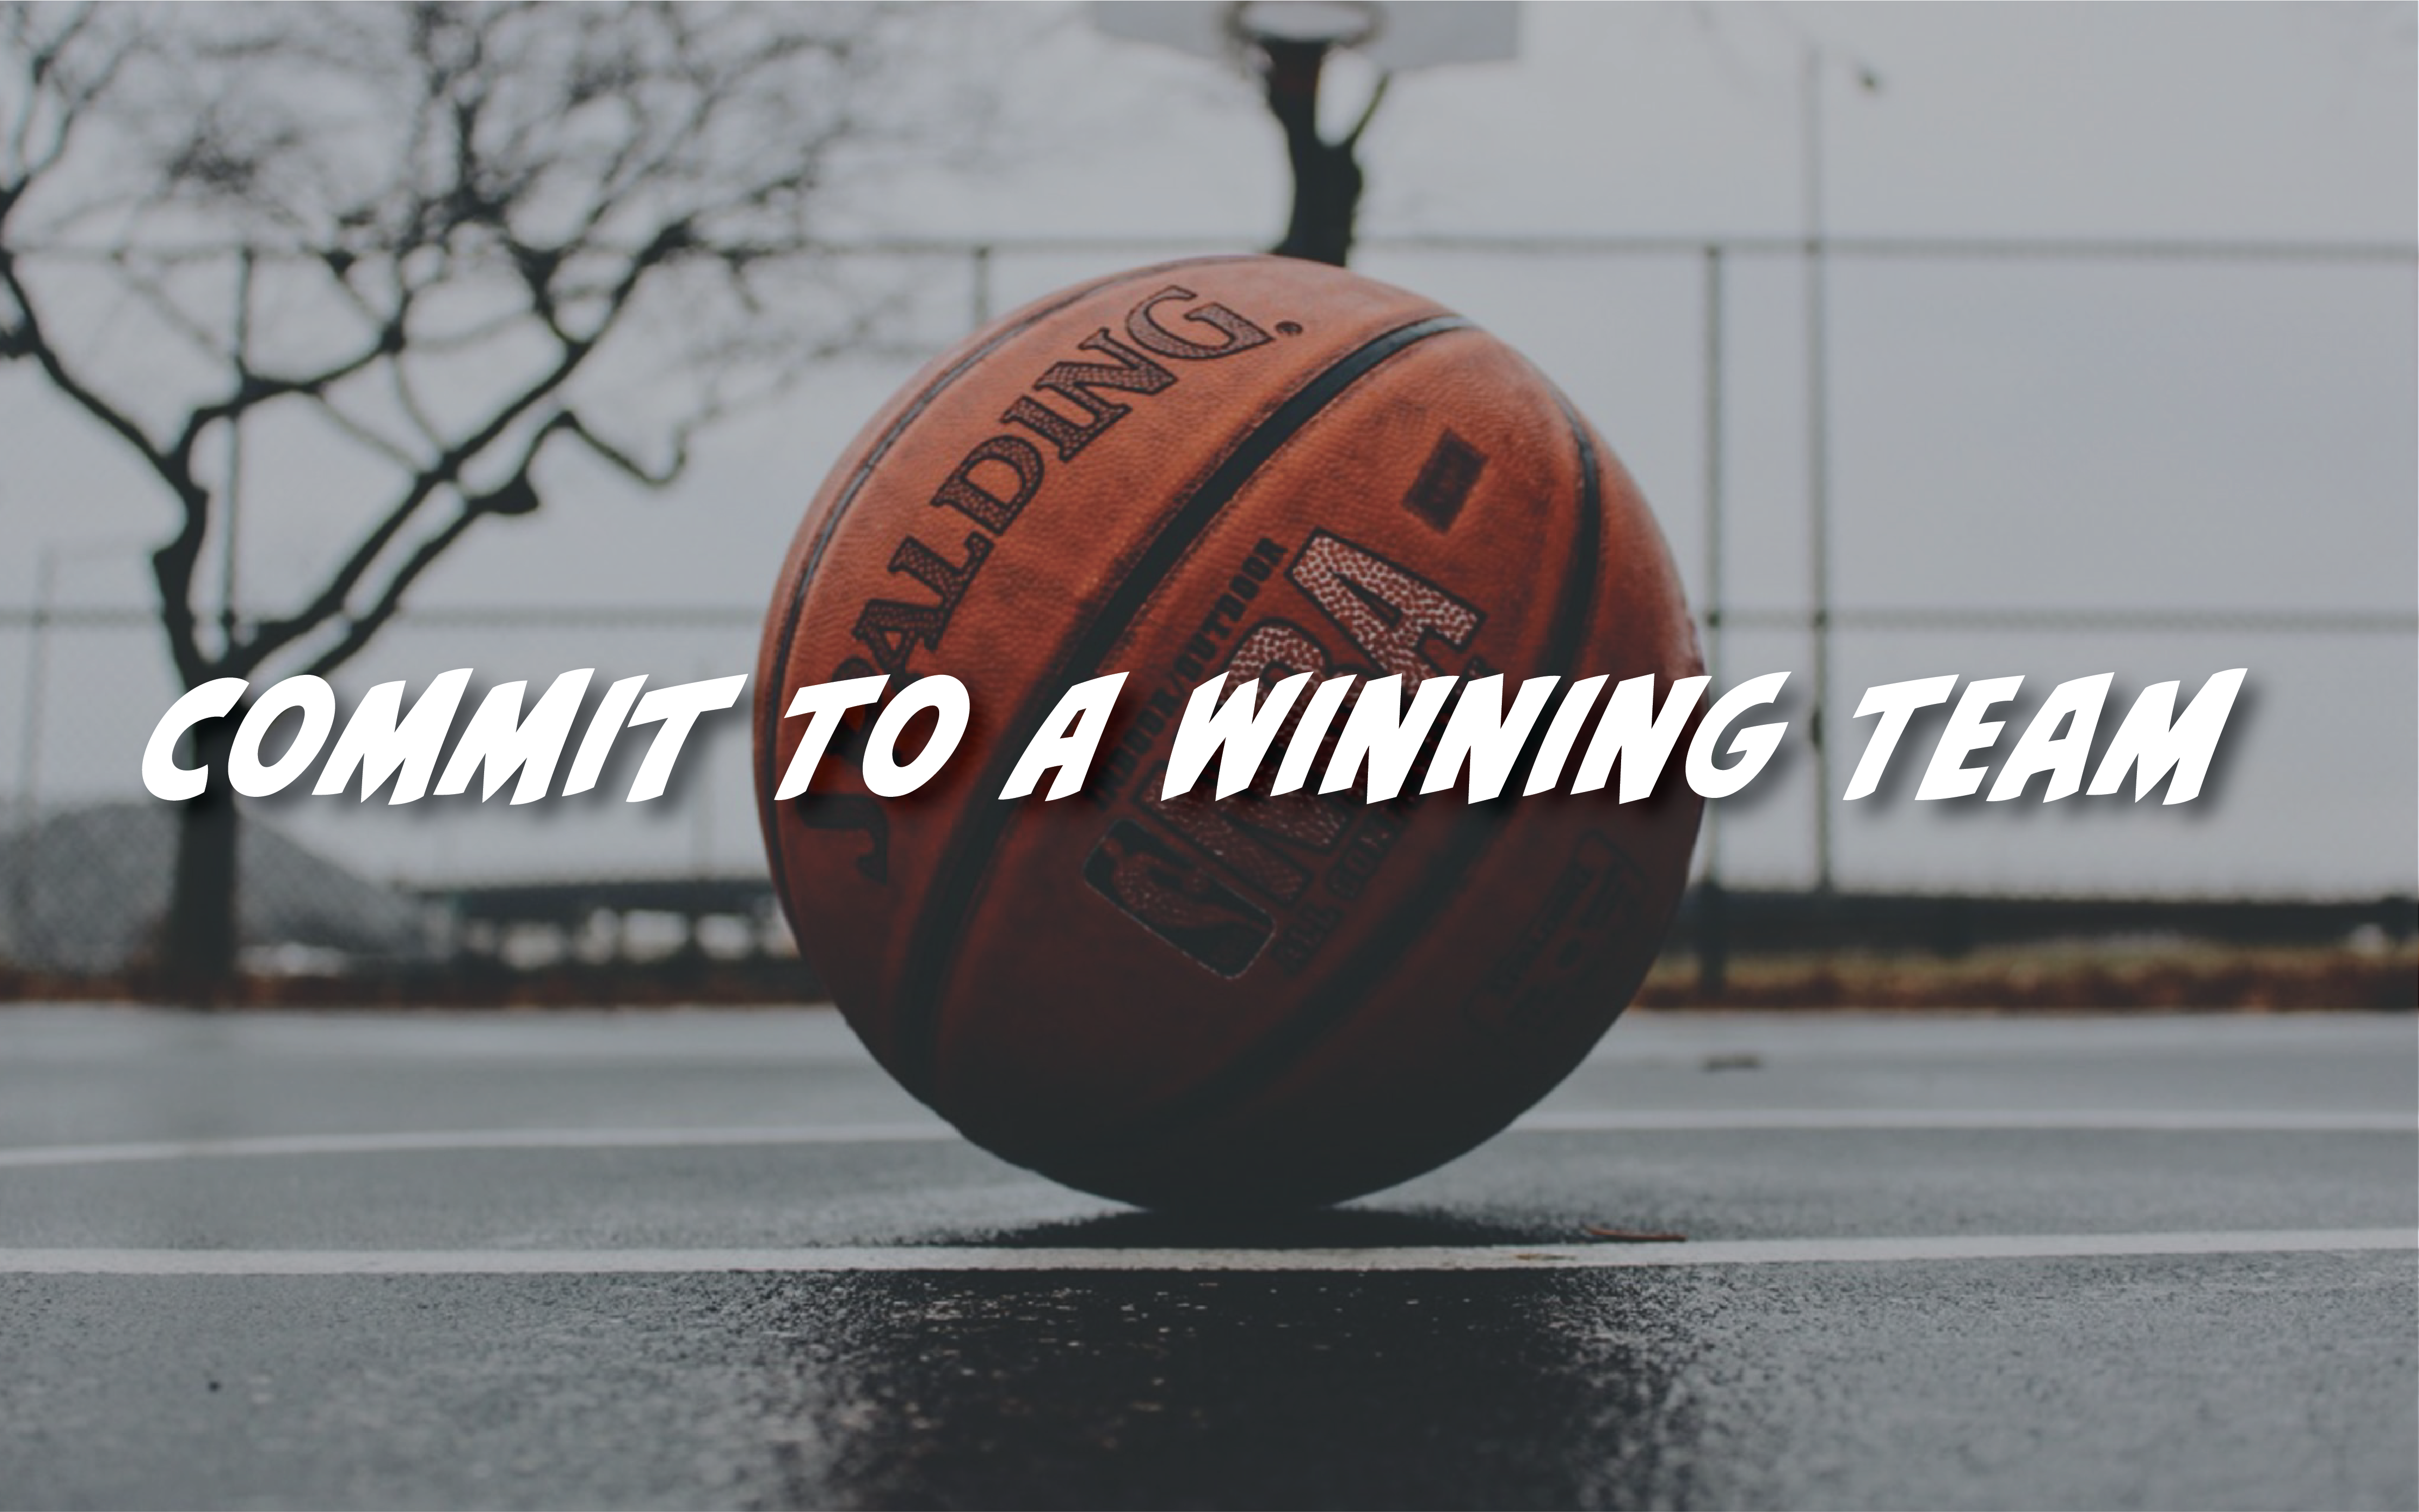 Aim Higher: Commit to a winning team with Mark Eaton 